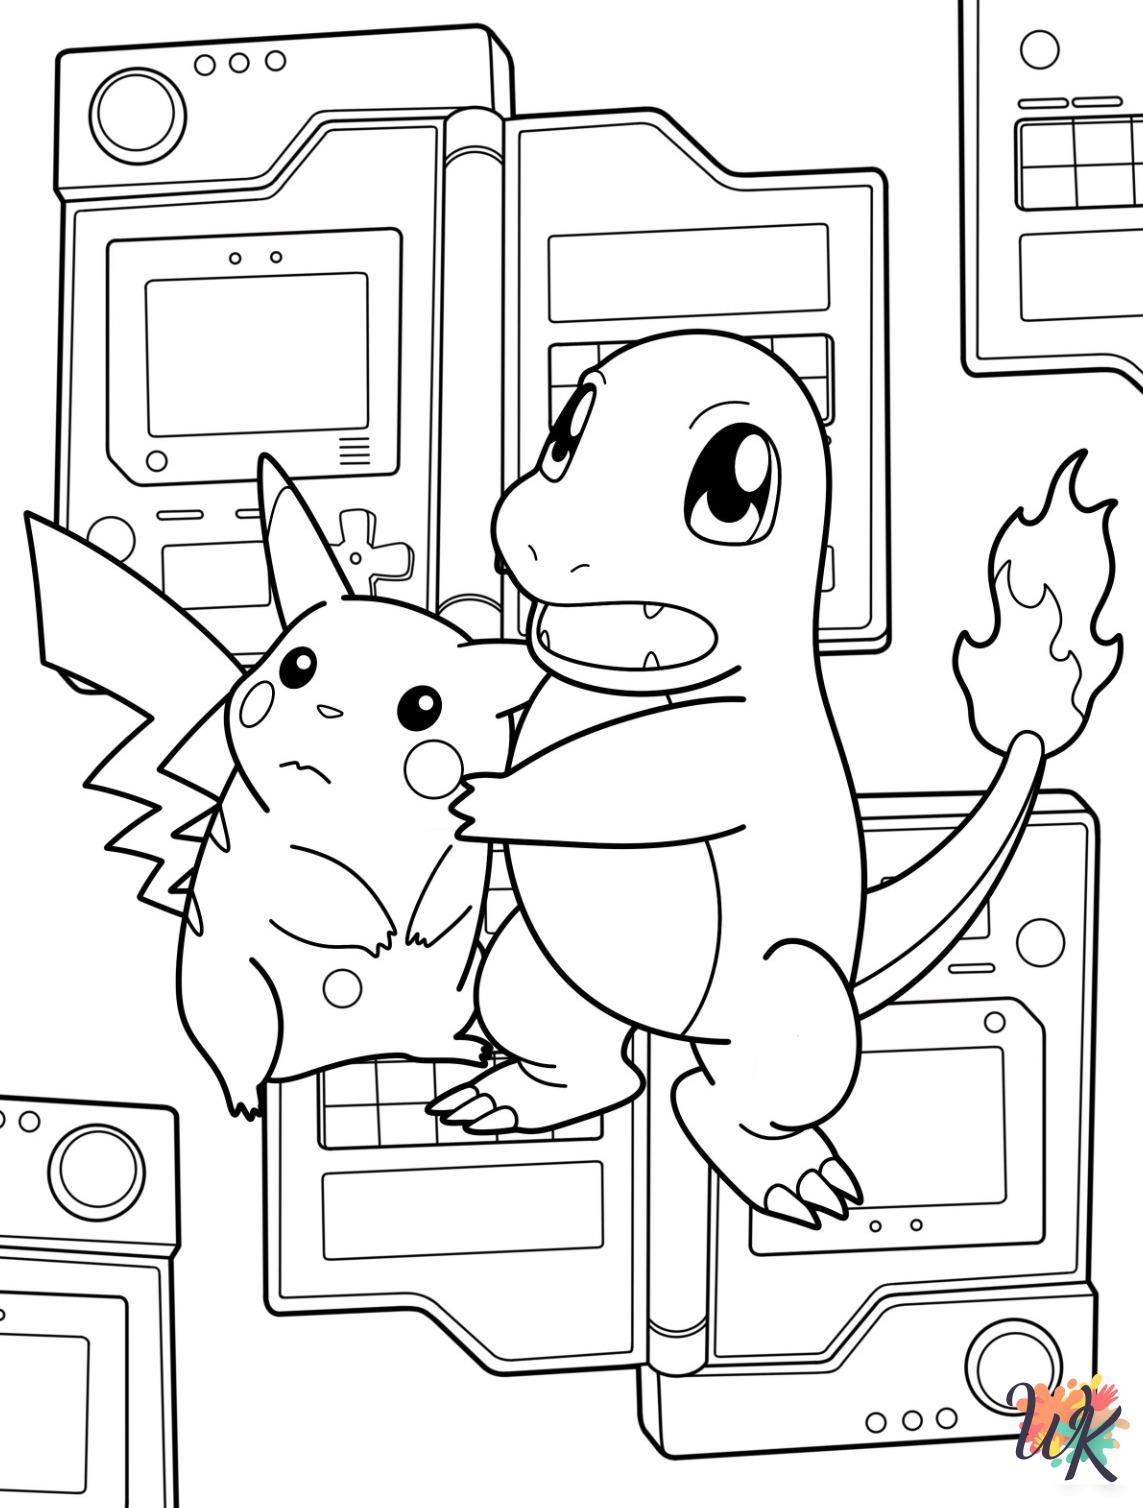 Charmander decorations coloring pages